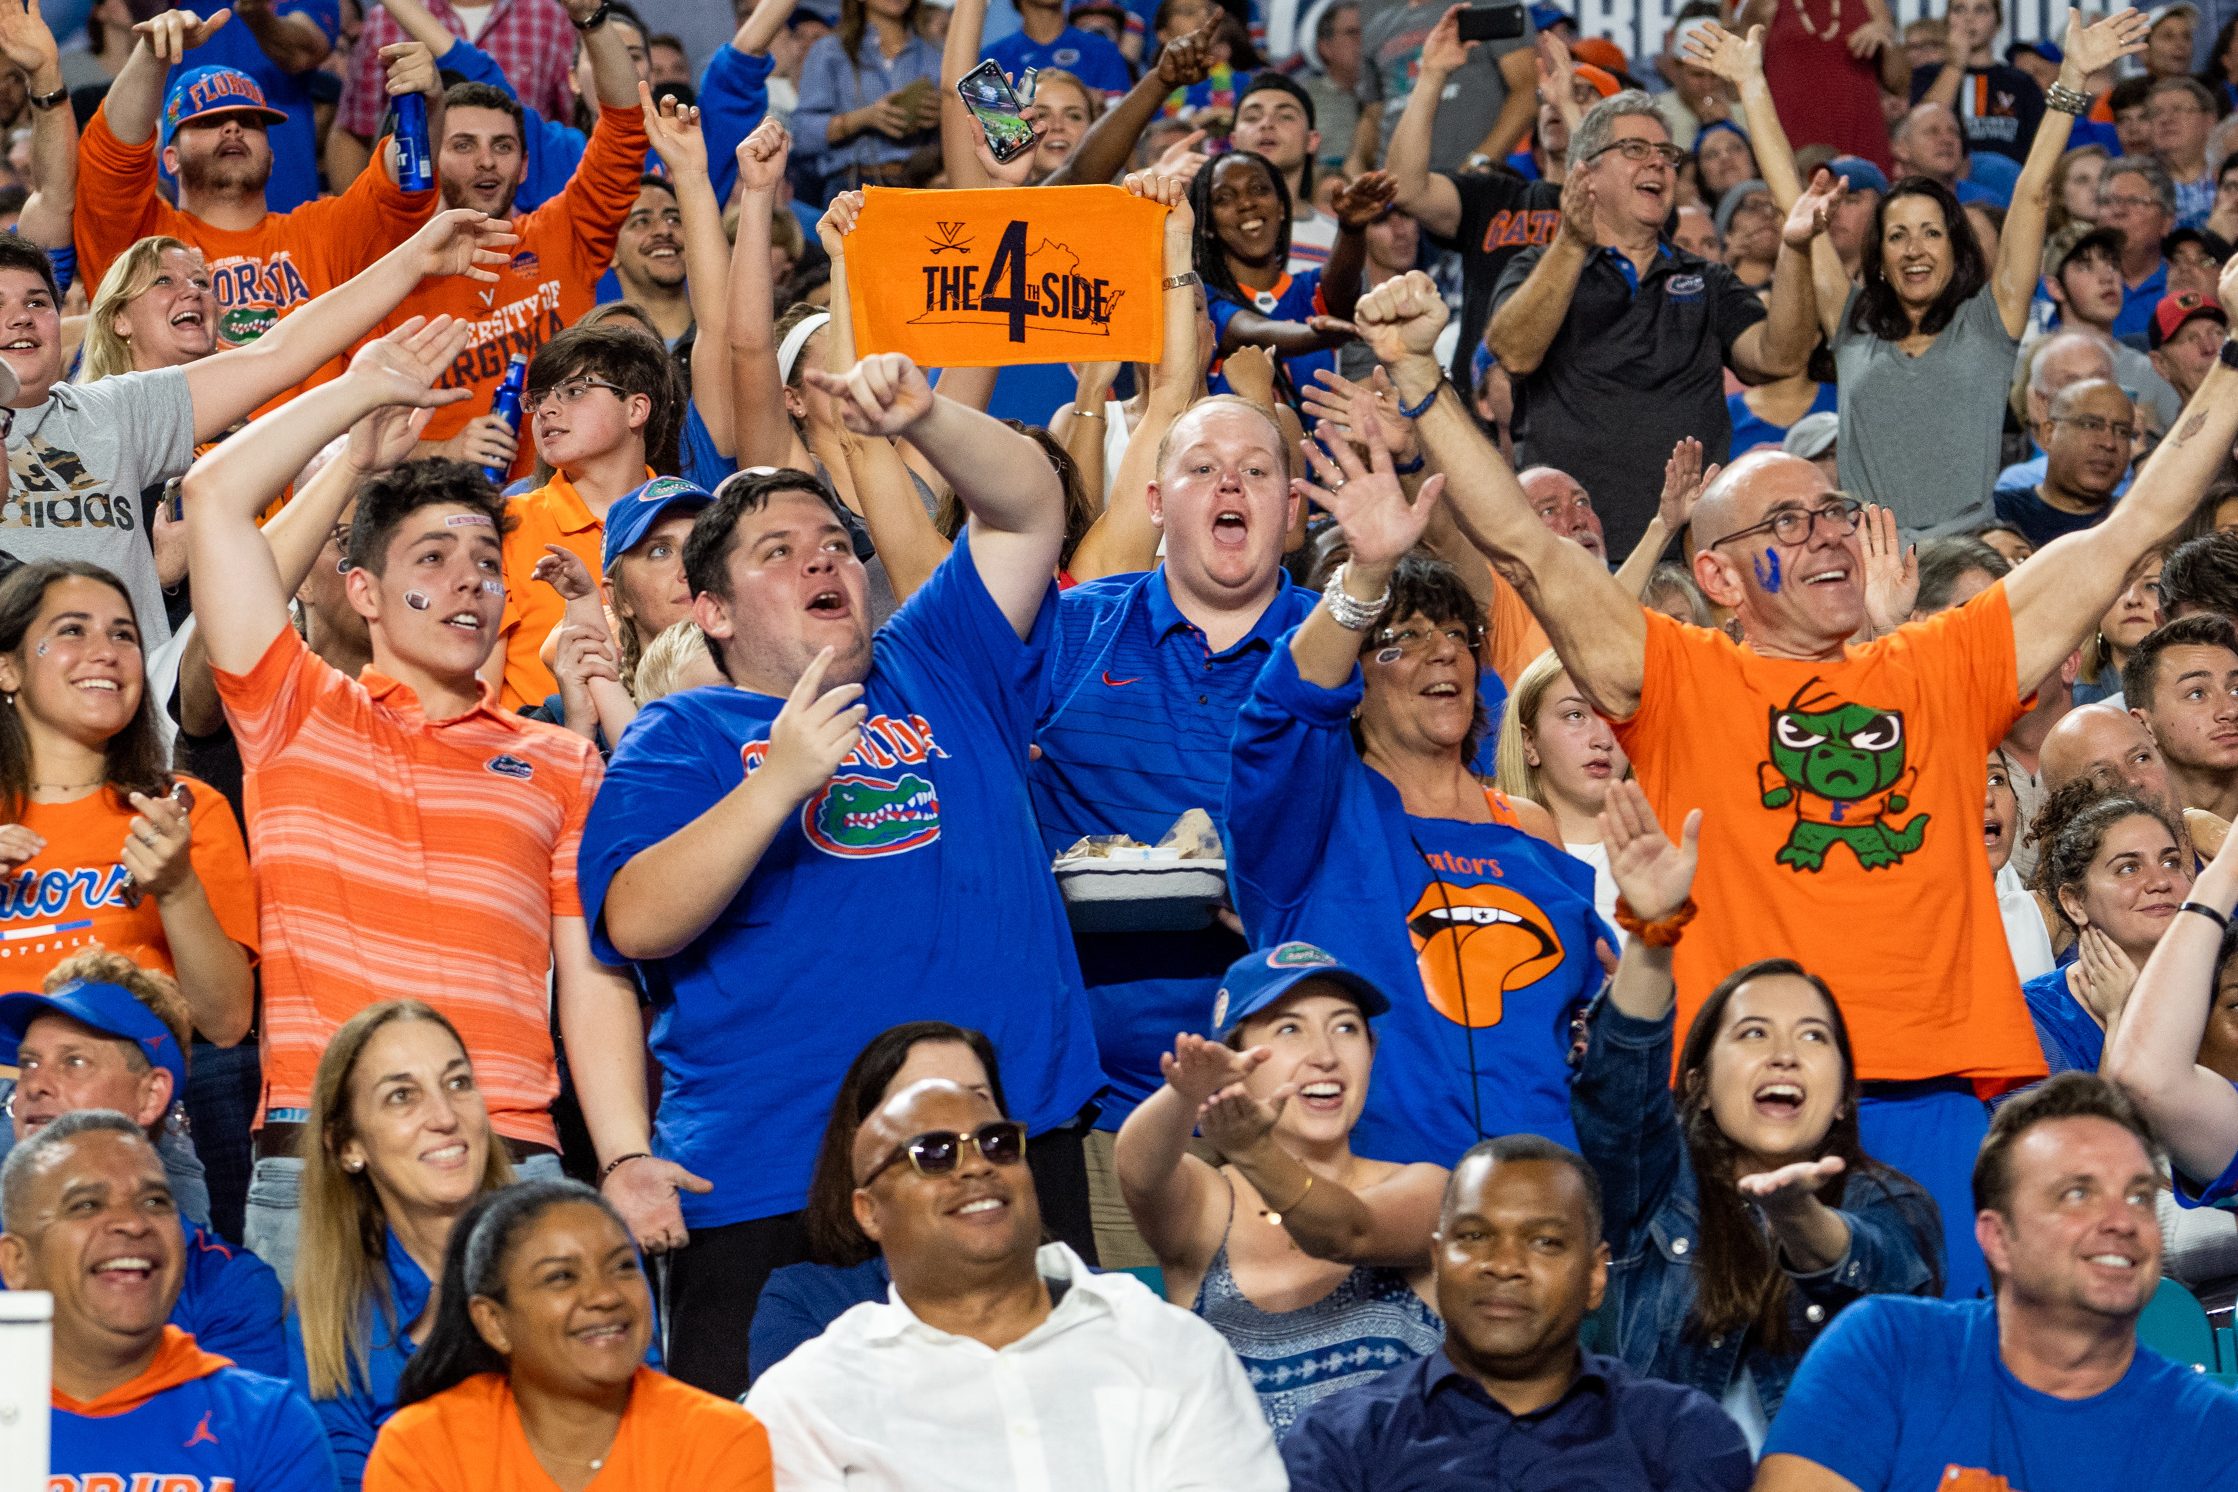 Sports Fans Can Pack Florida Stadiums to Full Capacity Due to Governor's Ruling